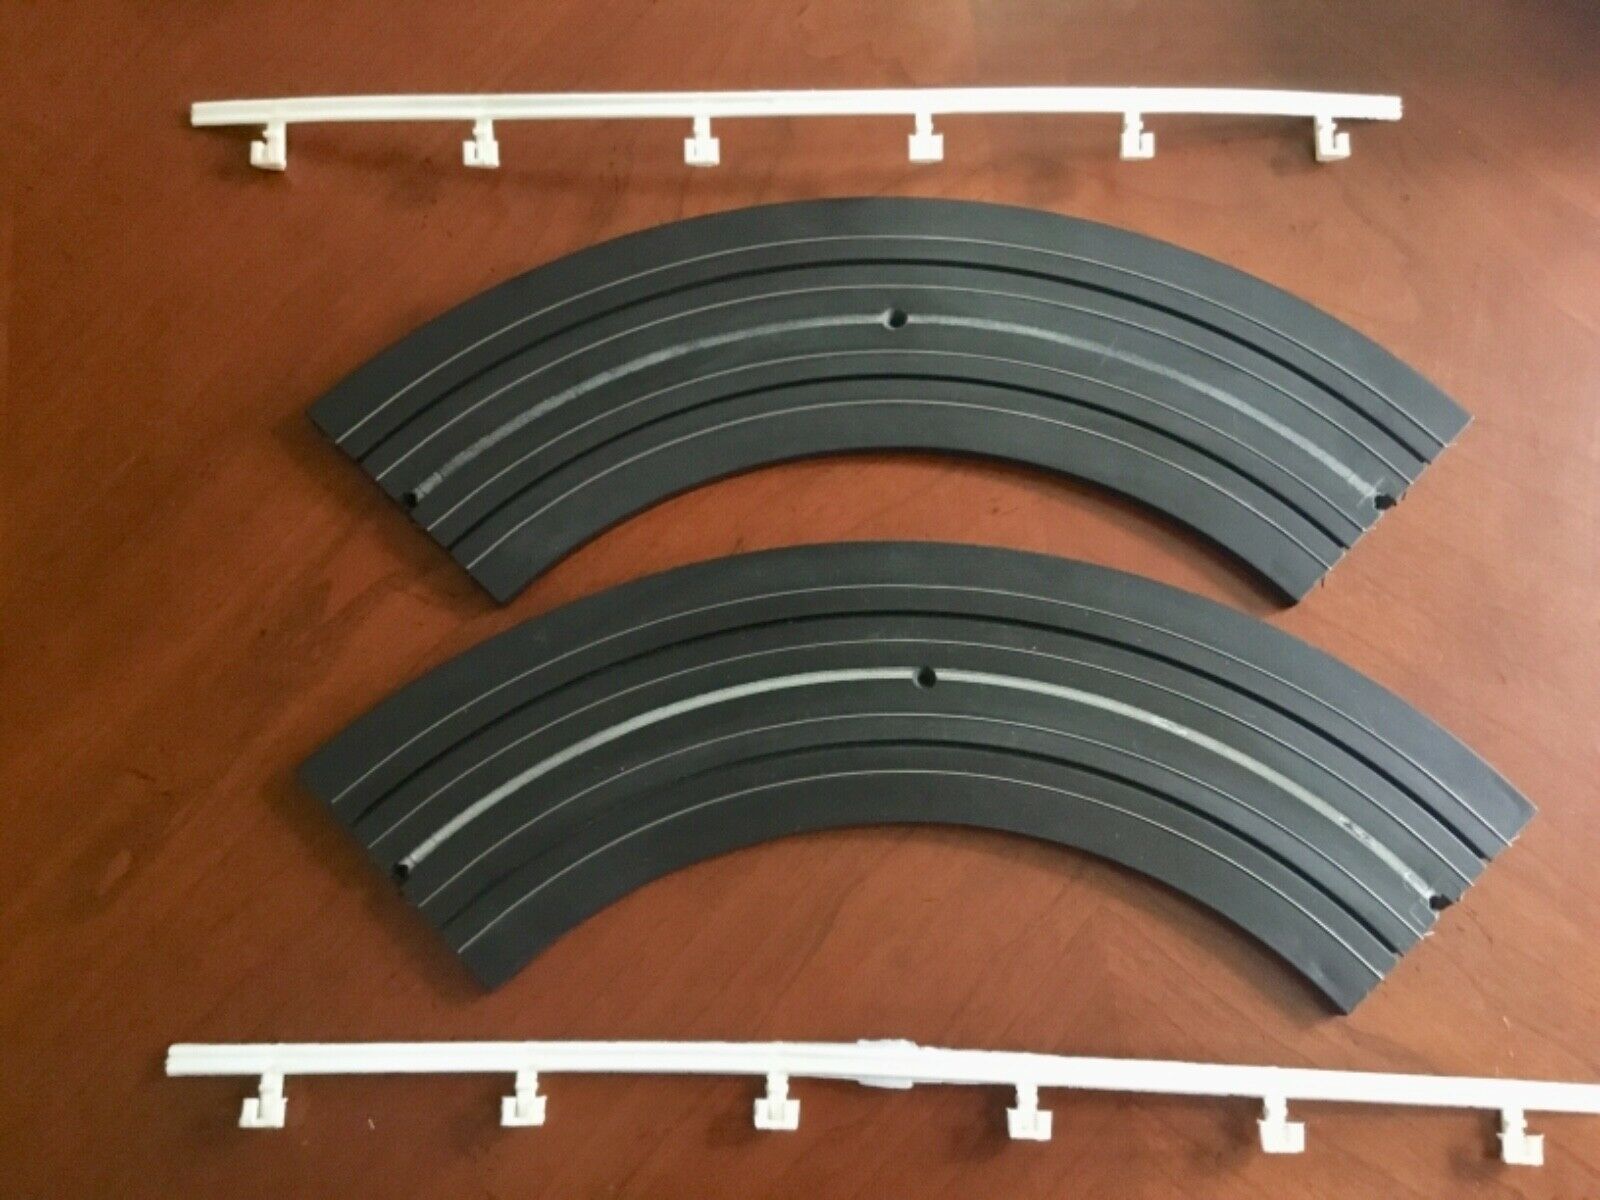 Aurora Model Motoring Ho Scale 9" Radius Curved Track #1519 Slight Reconditioned